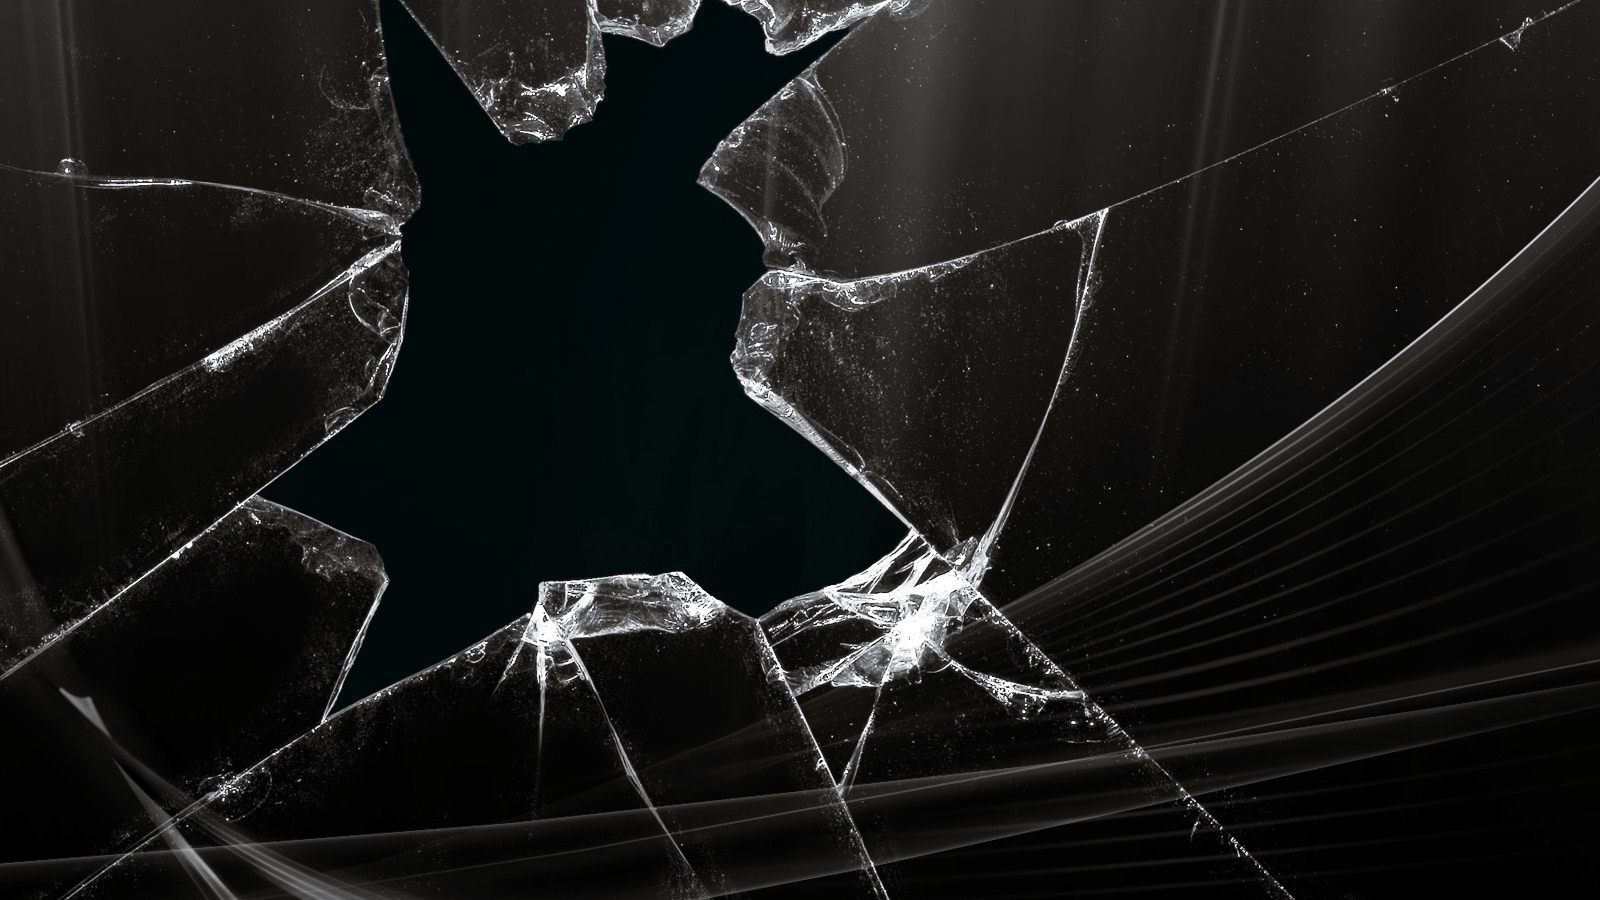 10 Best 3D Cracked Screen Wallpaper FULL HD 1920×1080 For PC Background